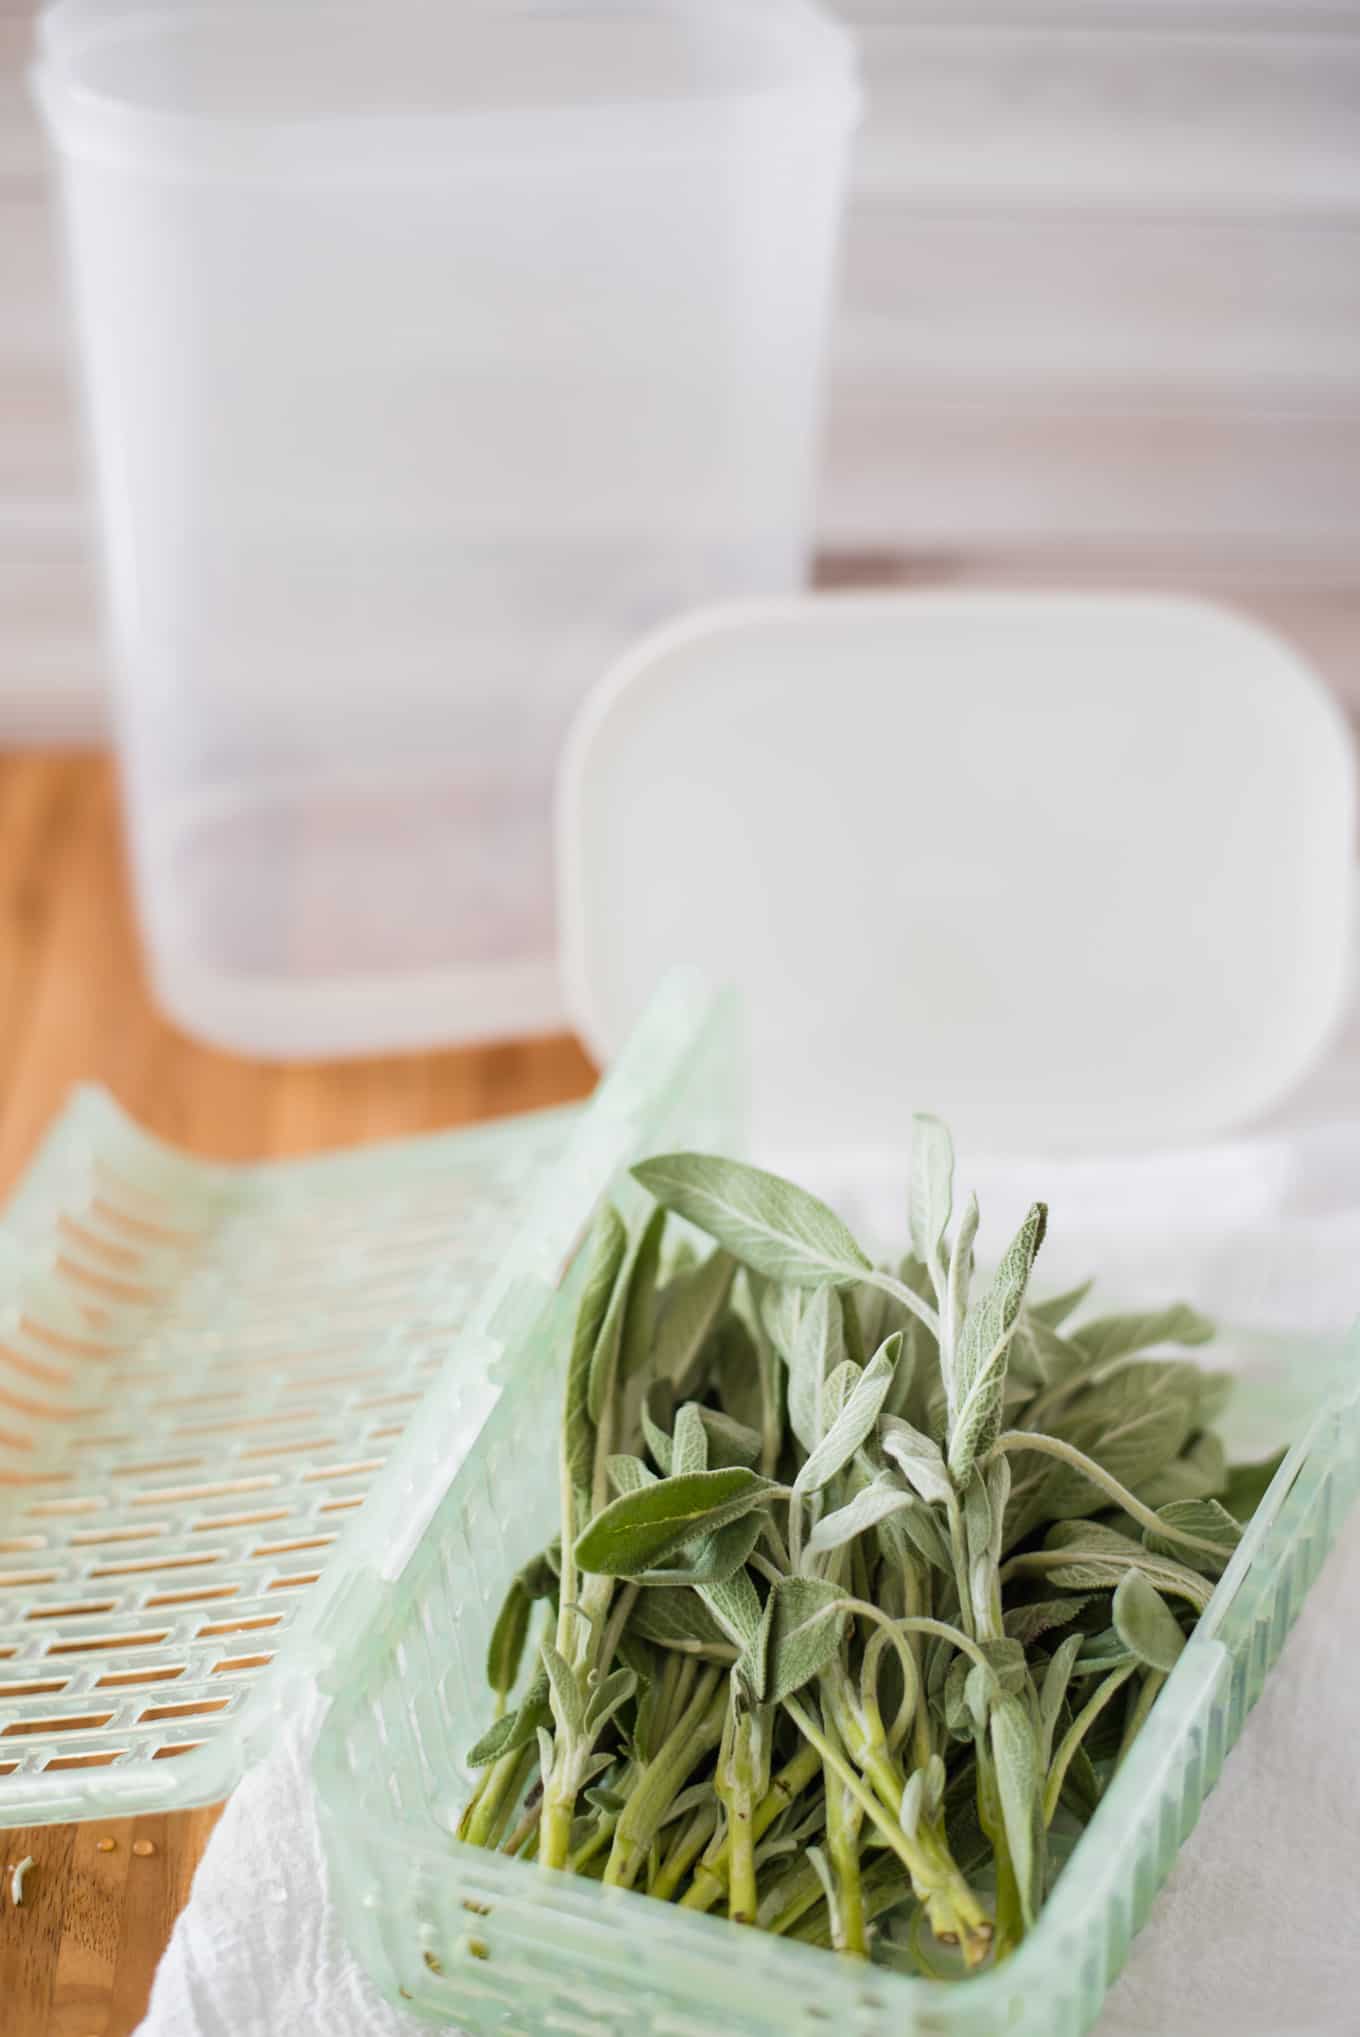 An opened plastic herb container with sage resting on top.